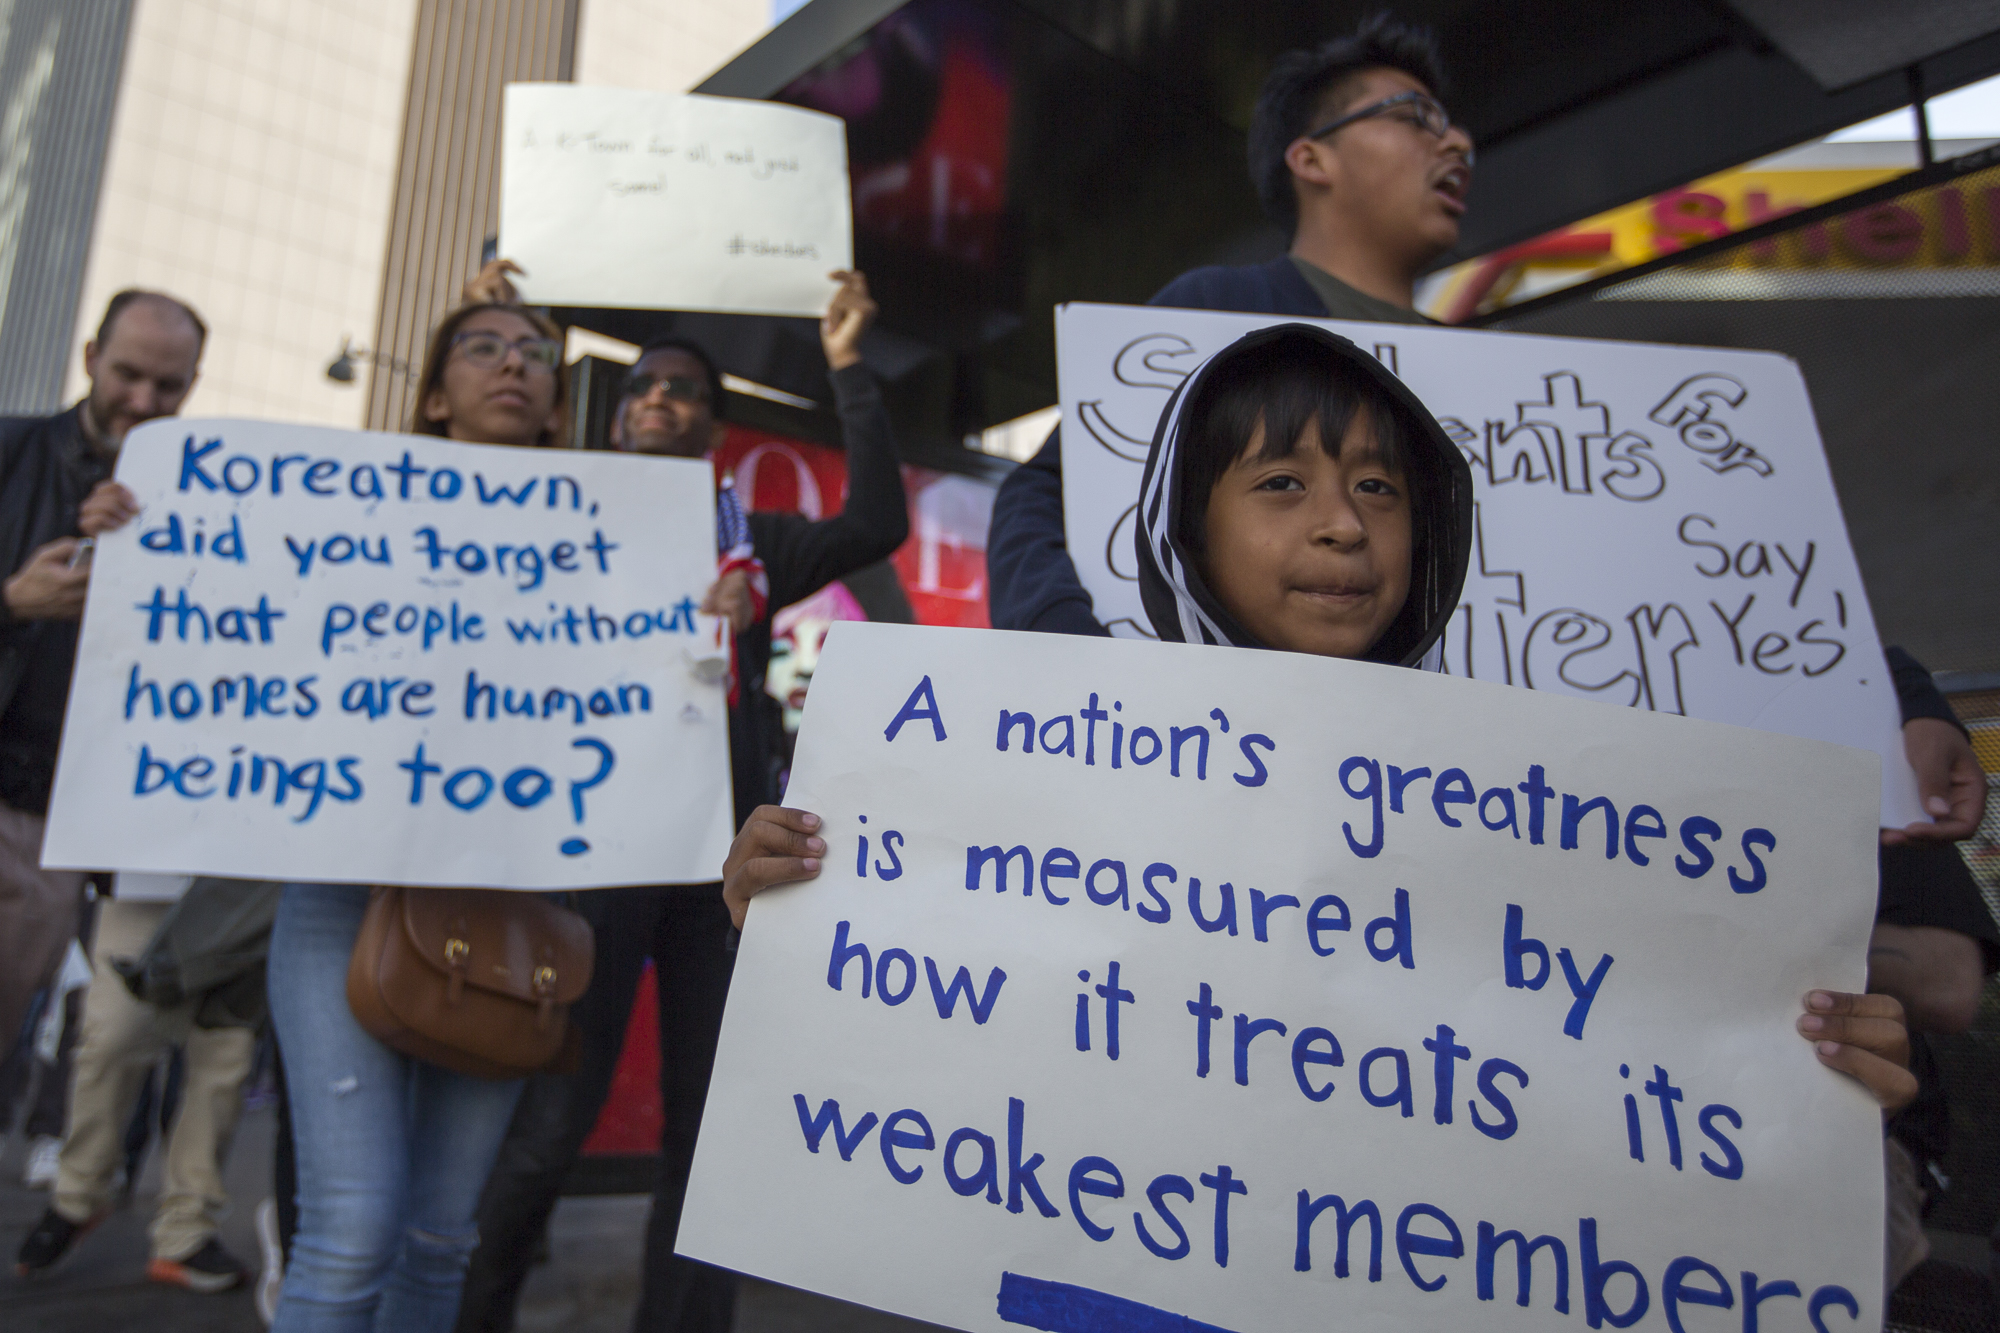  Protesters in support of the proposed emergency temporary shelter for homeless walk along Vermont Ave. to bring about awareness of the issue on May 26, 2018 in the Koreatown area of Los Angeles, California. (Jose Lopez/Corsair Contributor) 